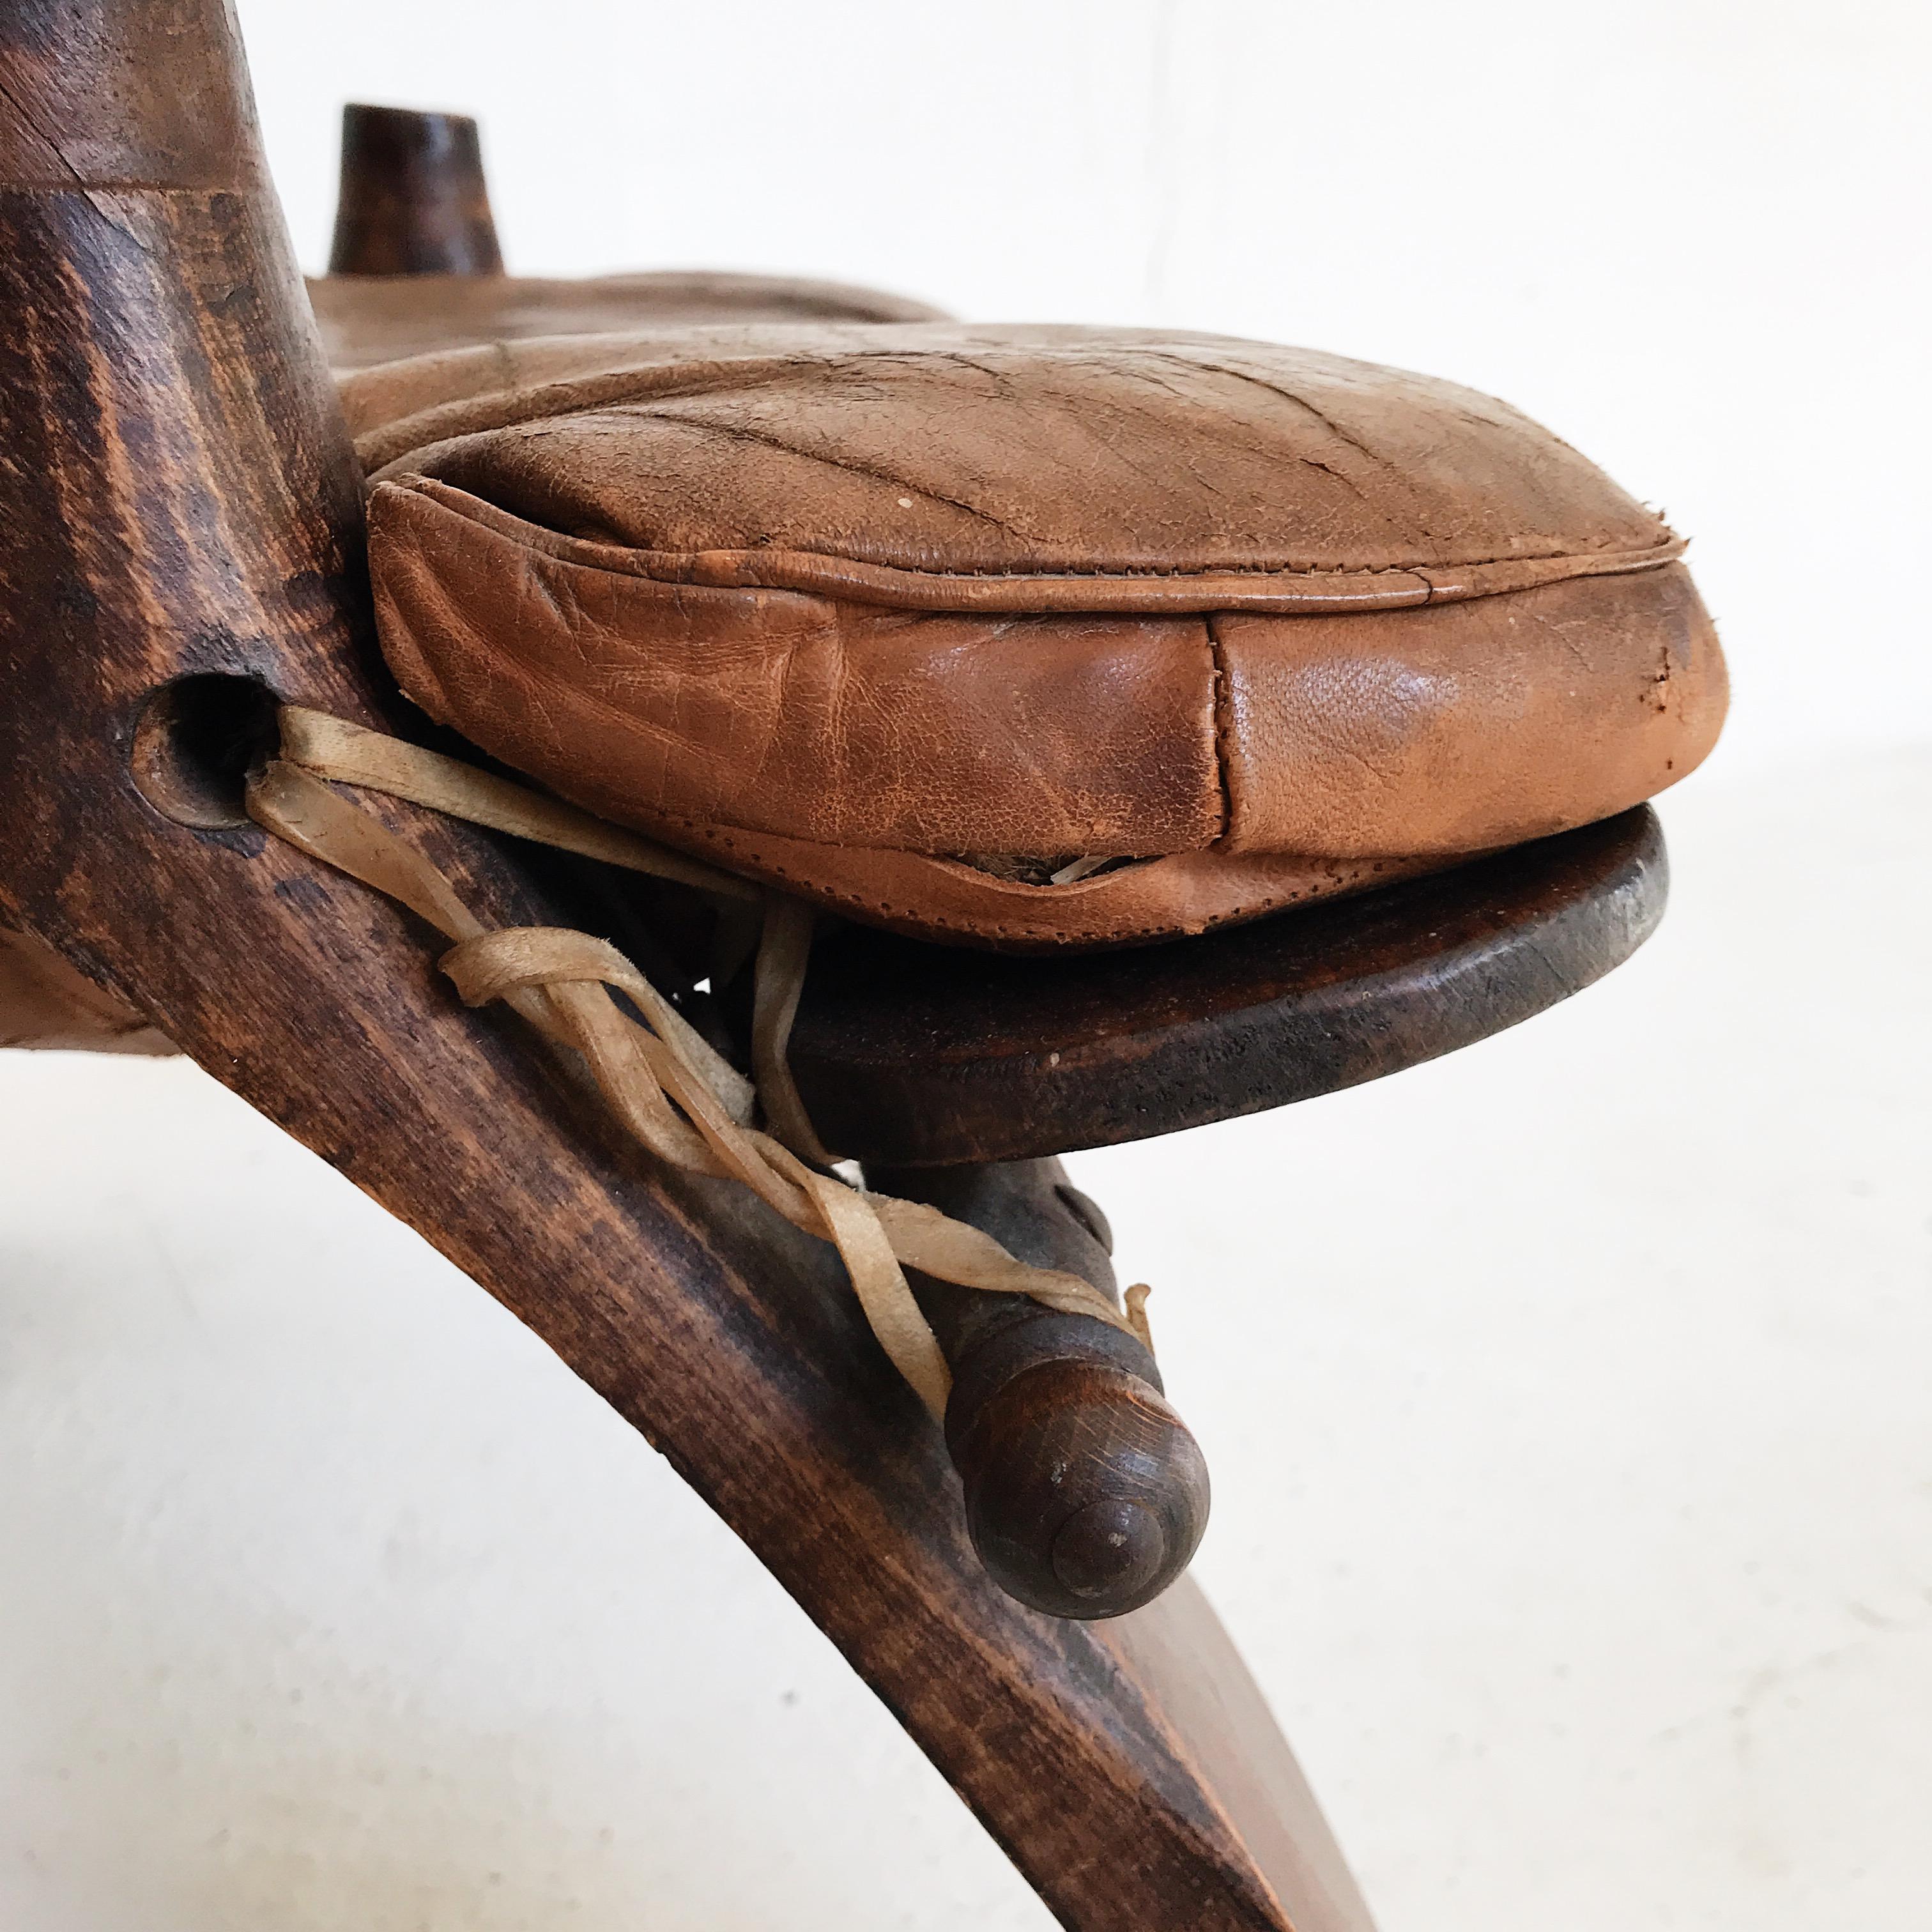 Mid-20th Century Egyptian Wooden Camel Saddle Stool with Original Leather Saddle For Sale 9